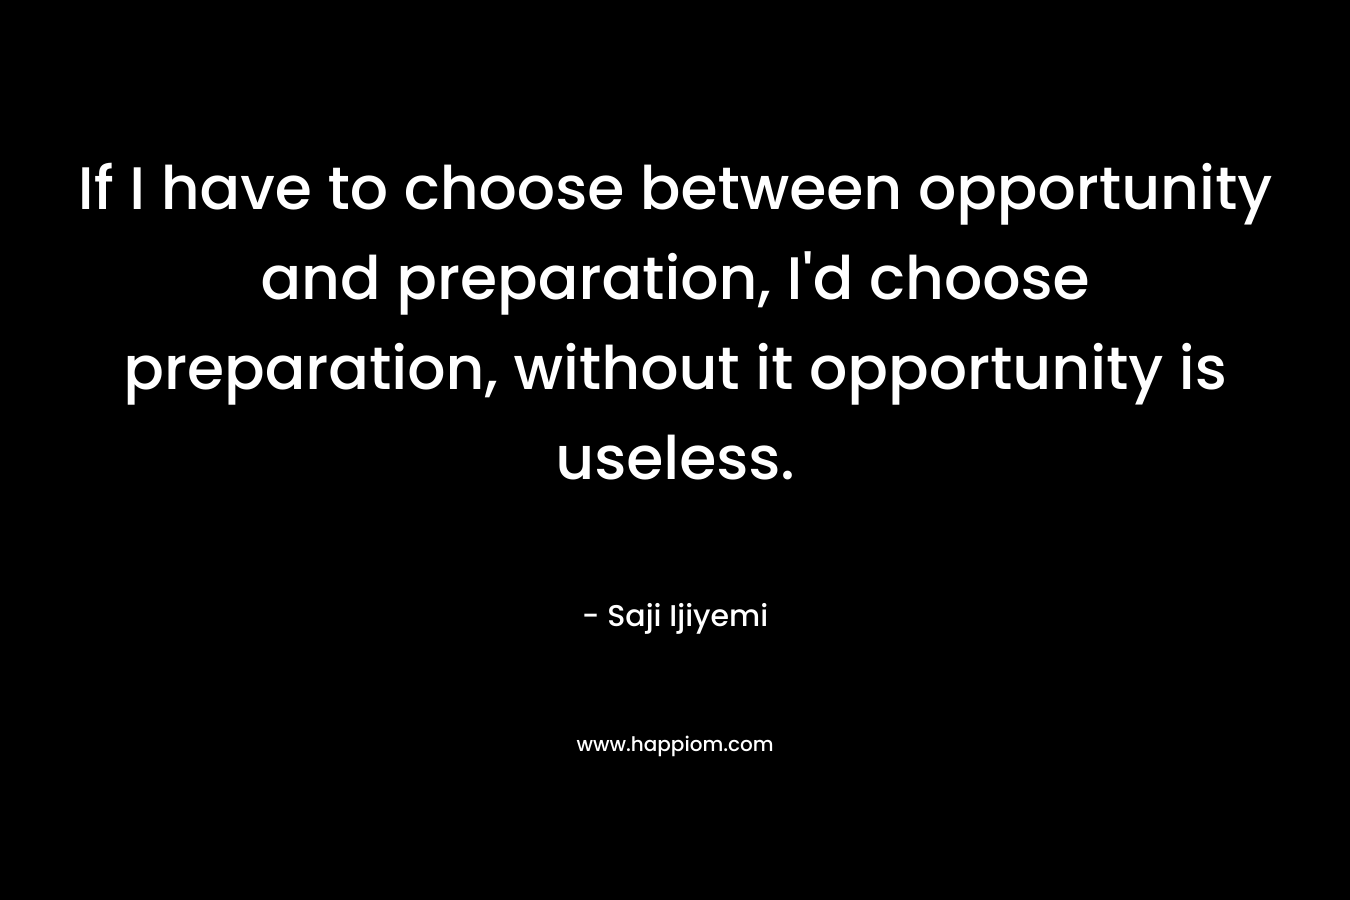 If I have to choose between opportunity and preparation, I'd choose preparation, without it opportunity is useless.